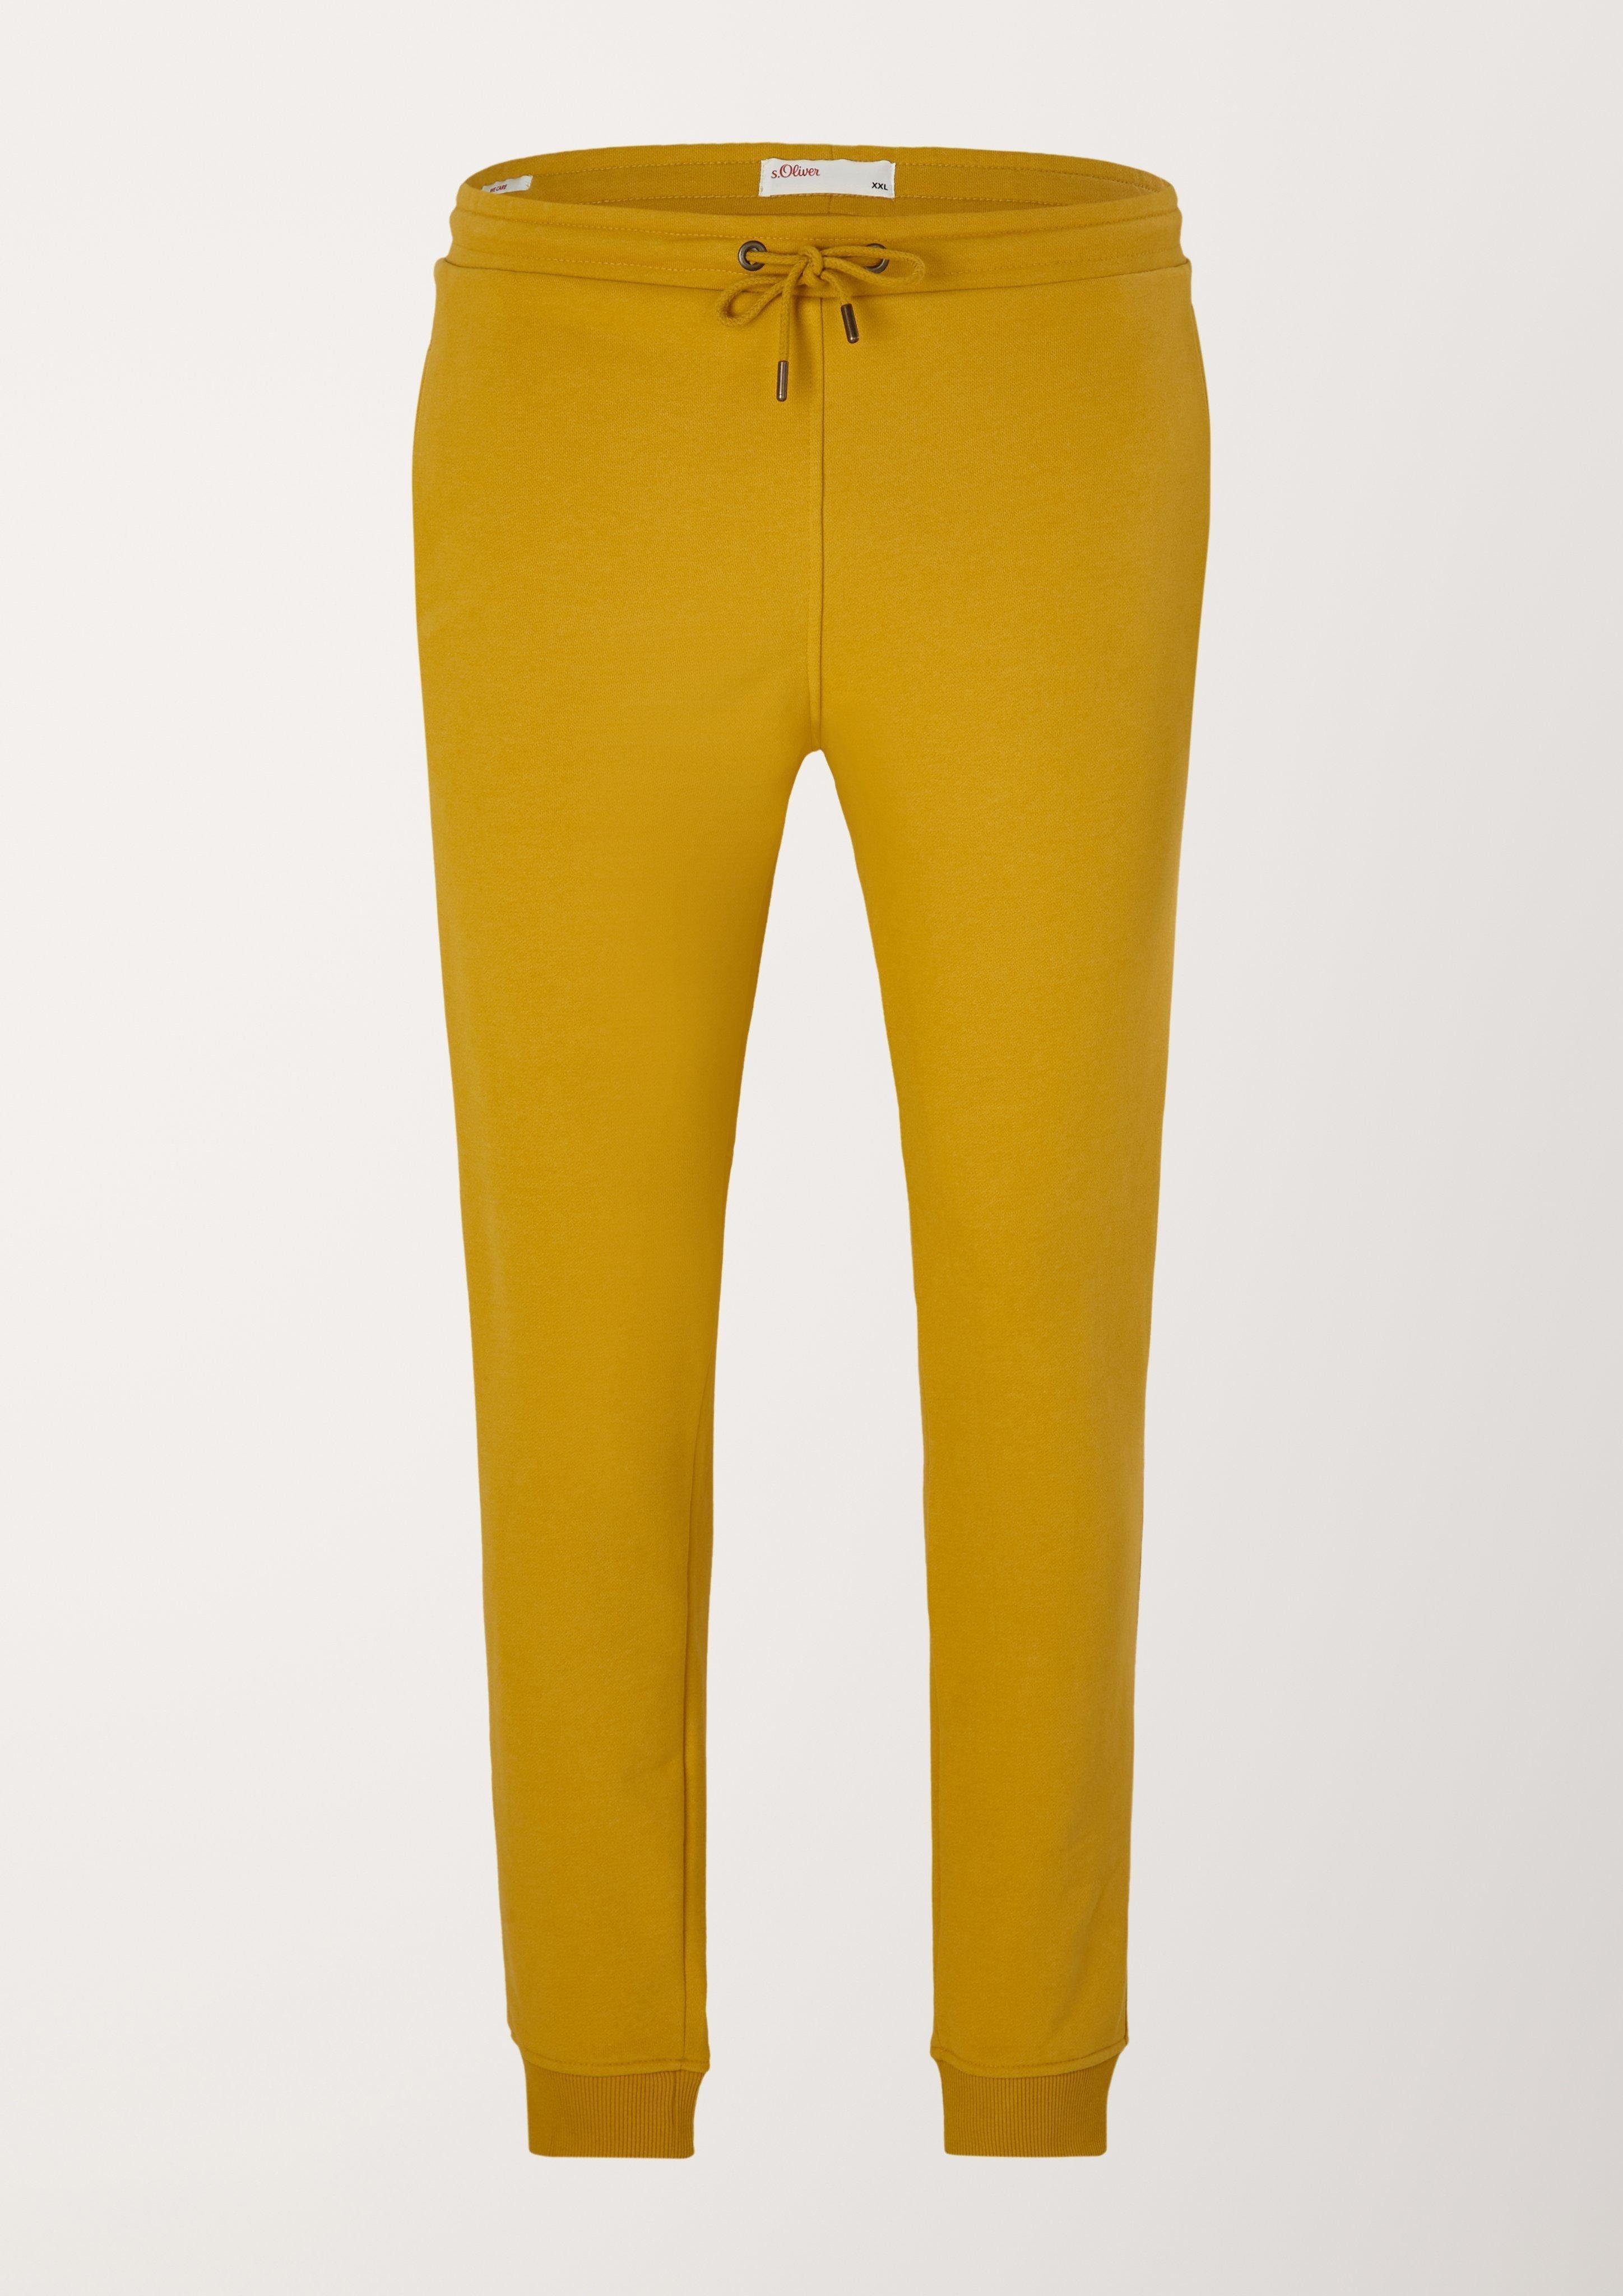 Stoffhose Relaxed: Sweat Rippbündchen yellow aus s.Oliver Jogger